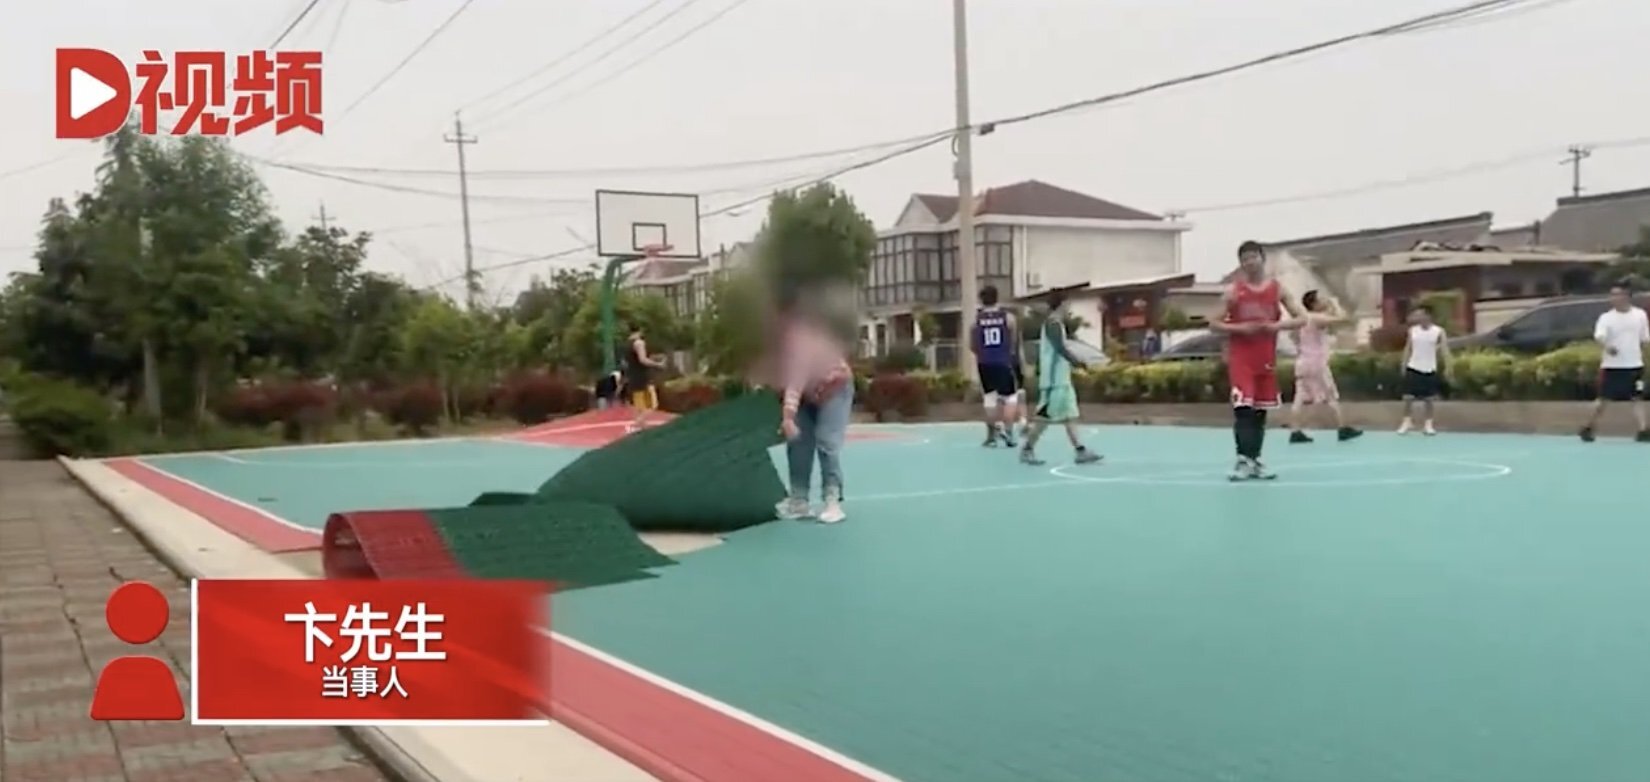 A woman tore apart a basketball court because she thought the players were too loud. Photo: Baidu